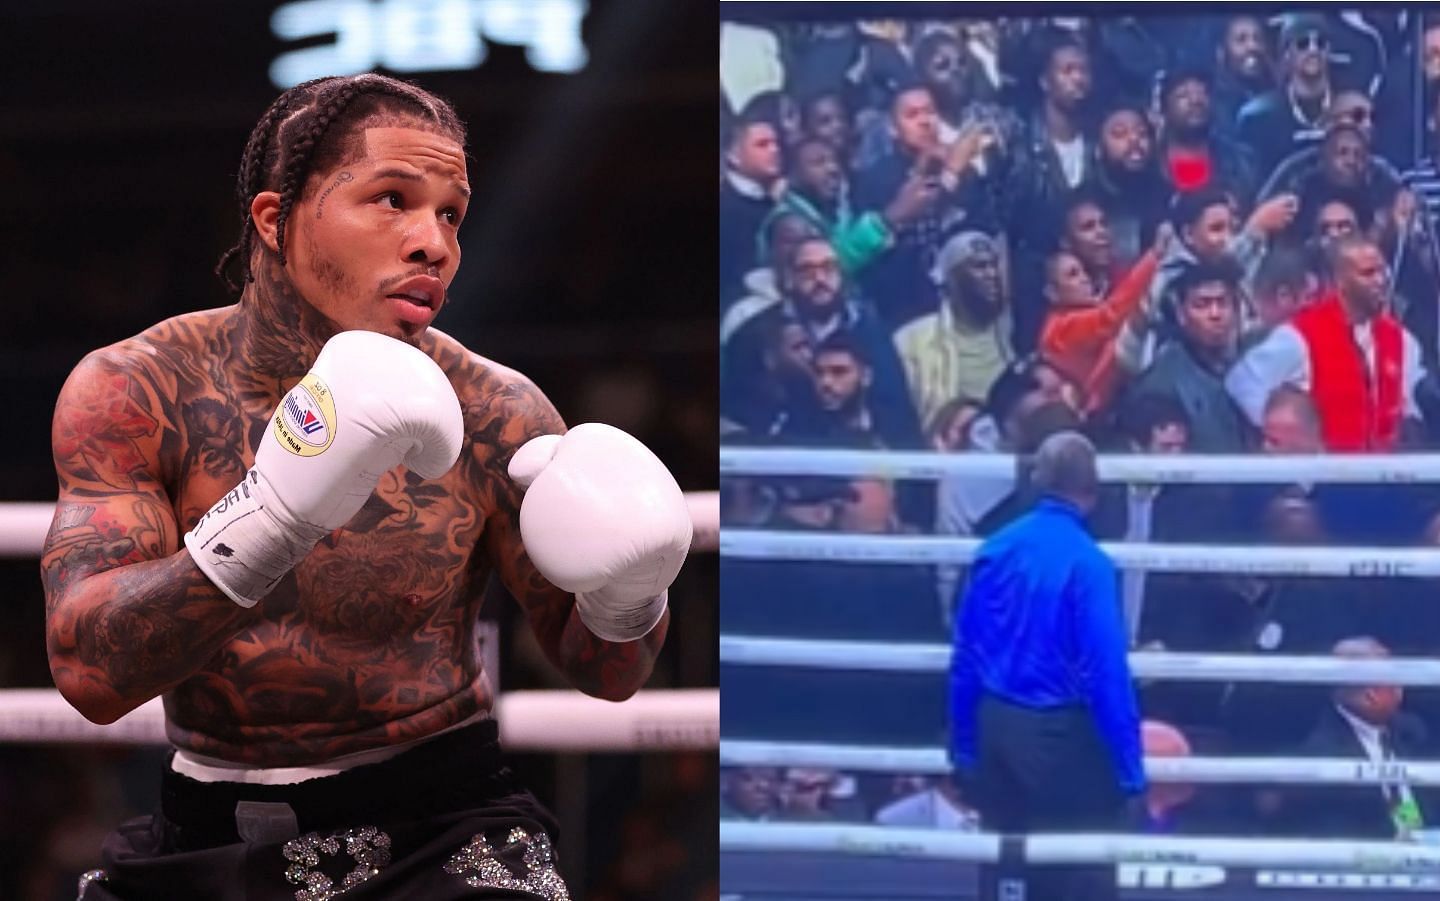 WATCH A fight broke out in the crowd during Gervonta Davis vs